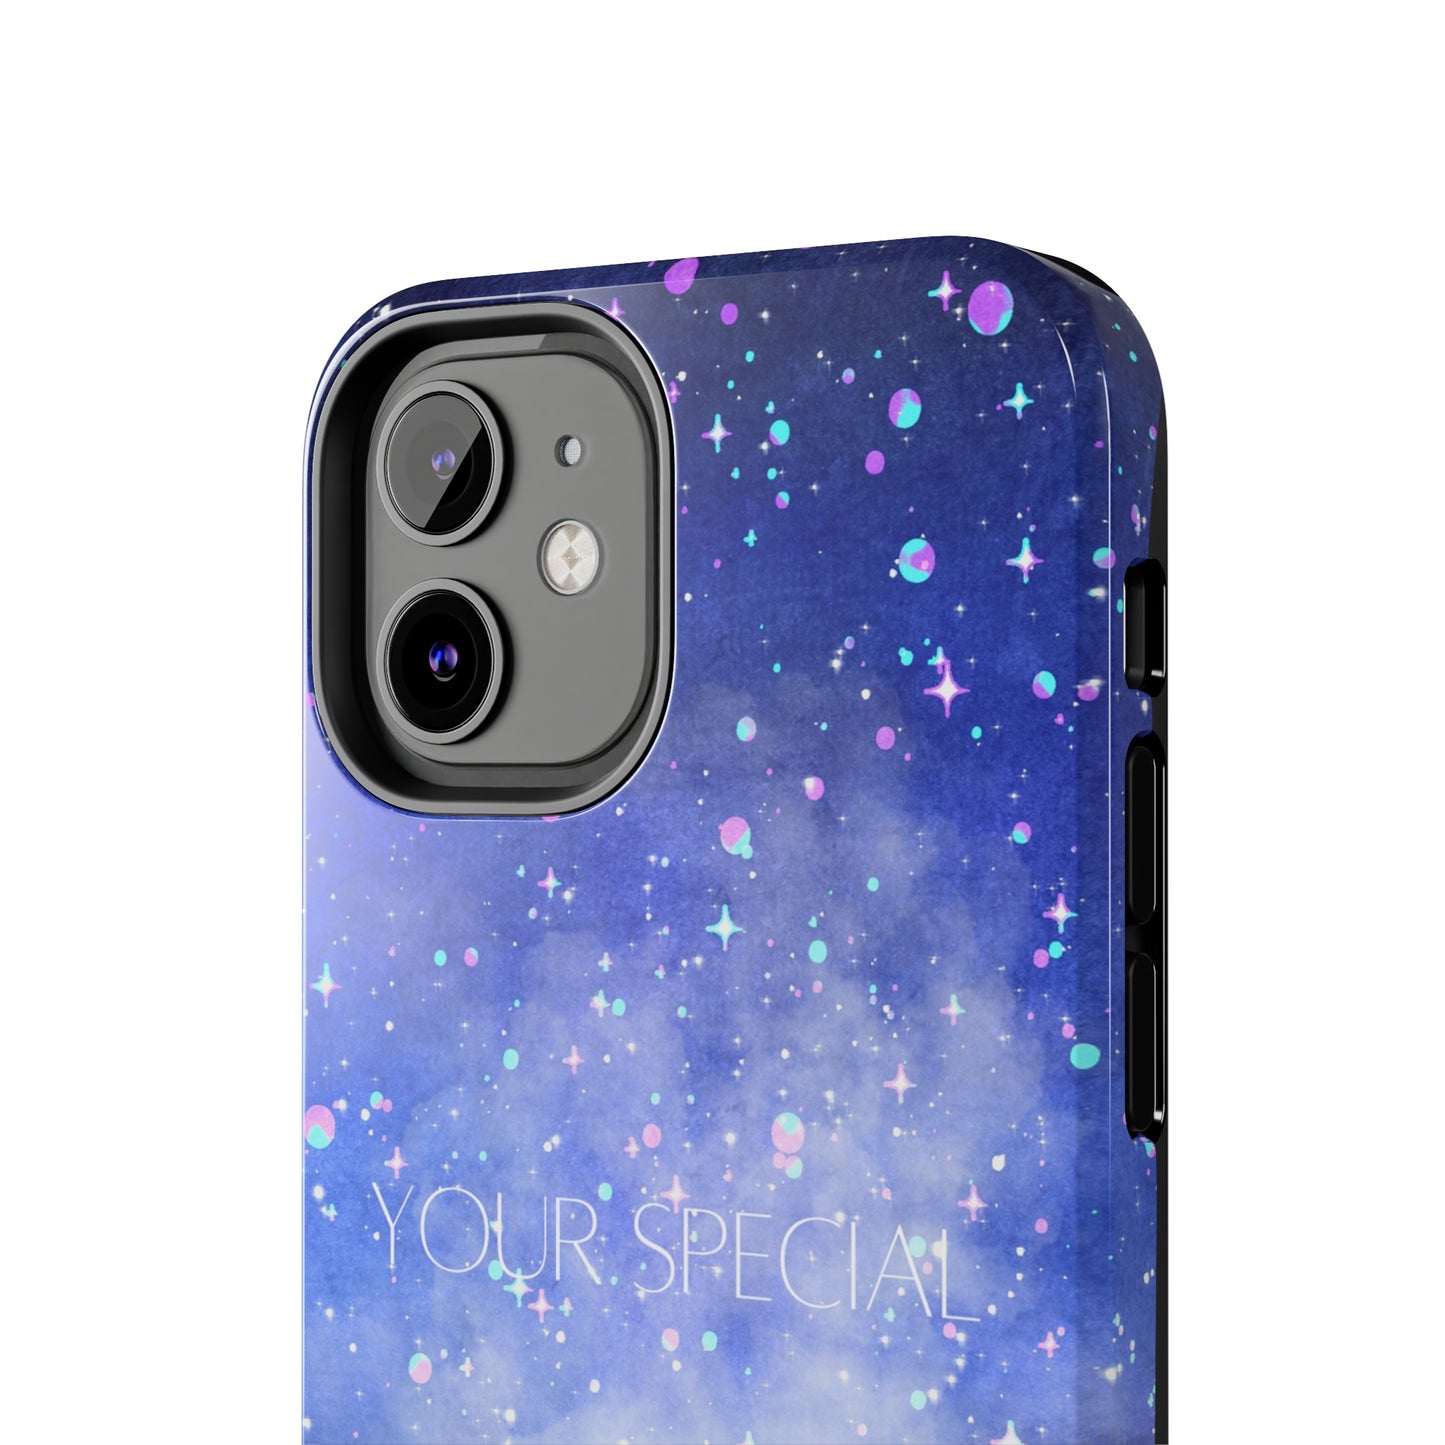 Your Special  - Blue - Custom Phone Case, Impact-Resistant Polycarbonate Shell, Wireless Charging, iPhone 7, 8, X, 11, 12, 13, 14 & more. Printify